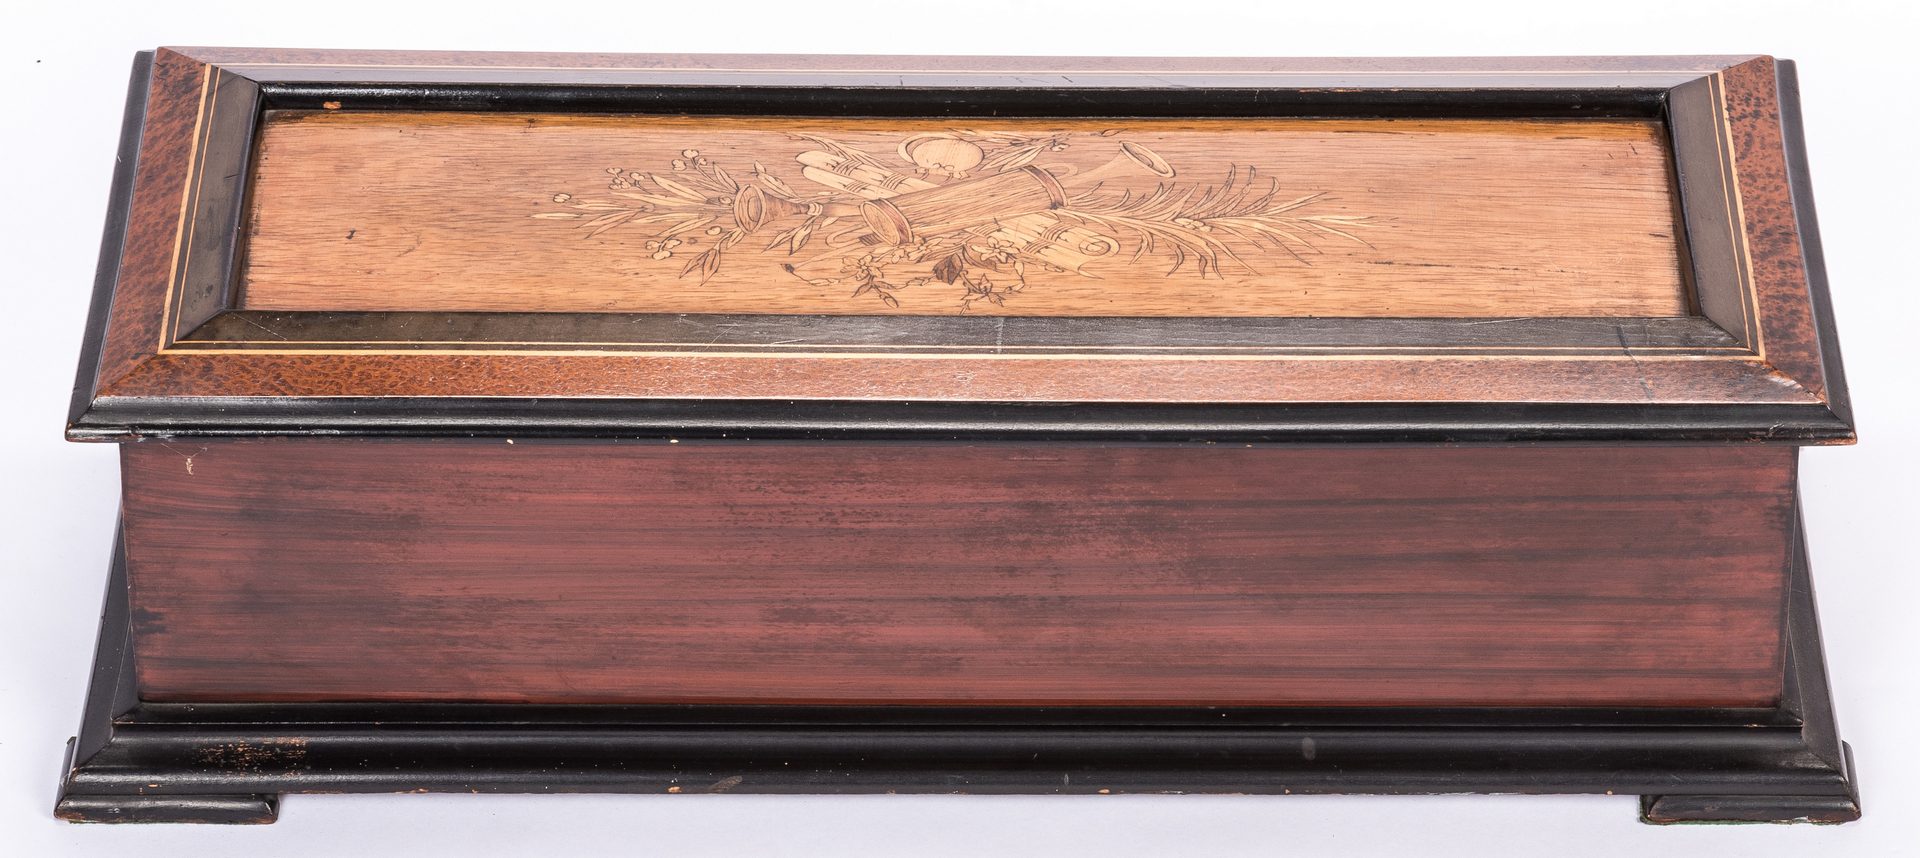 Lot 784: Swiss Cylinder Music Box w/ Marquetry Inlay